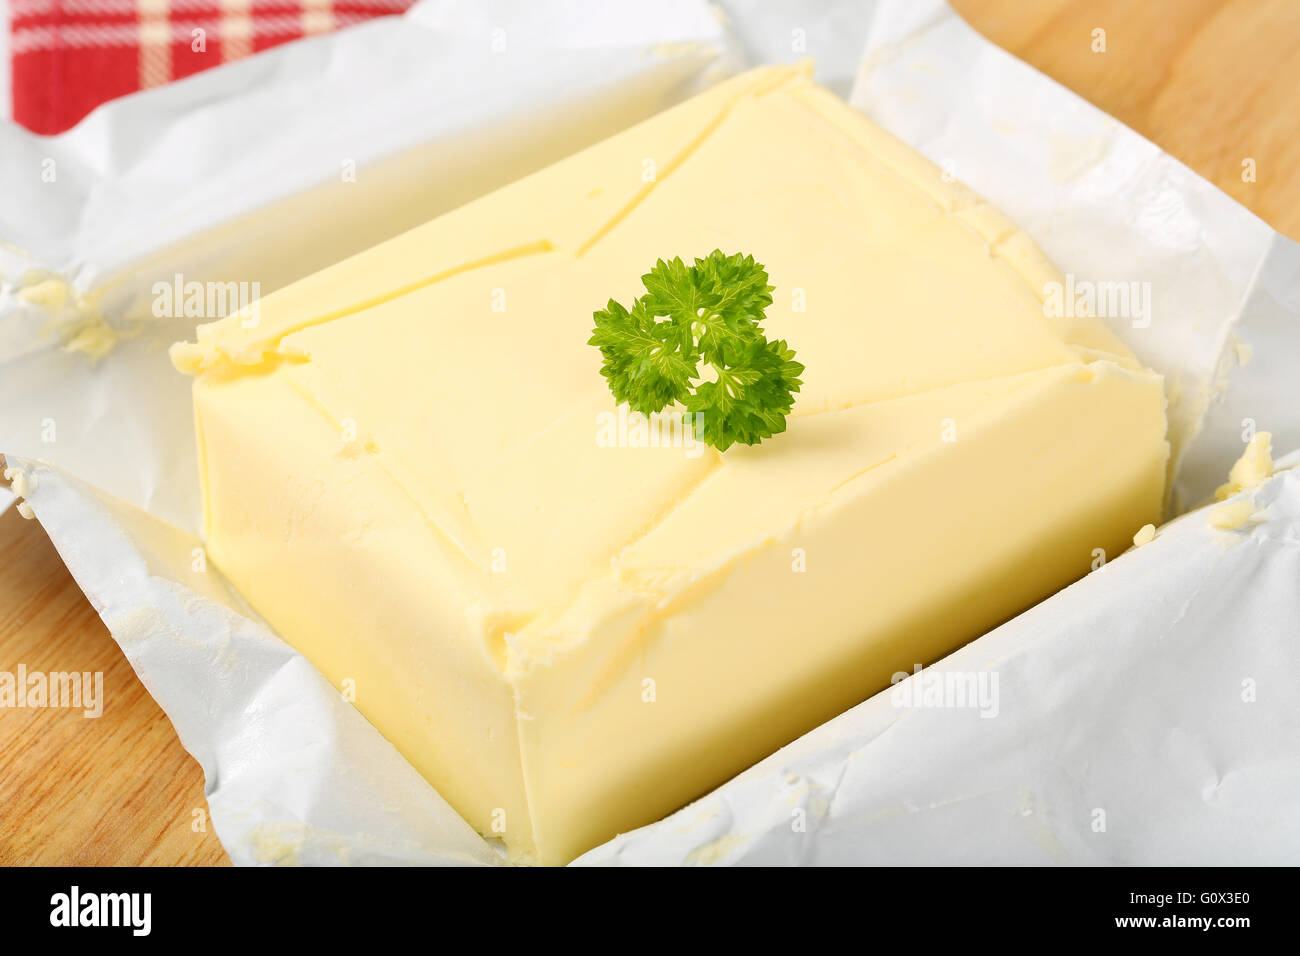 block of fresh butter on wooden cutting board - detail Stock Photo